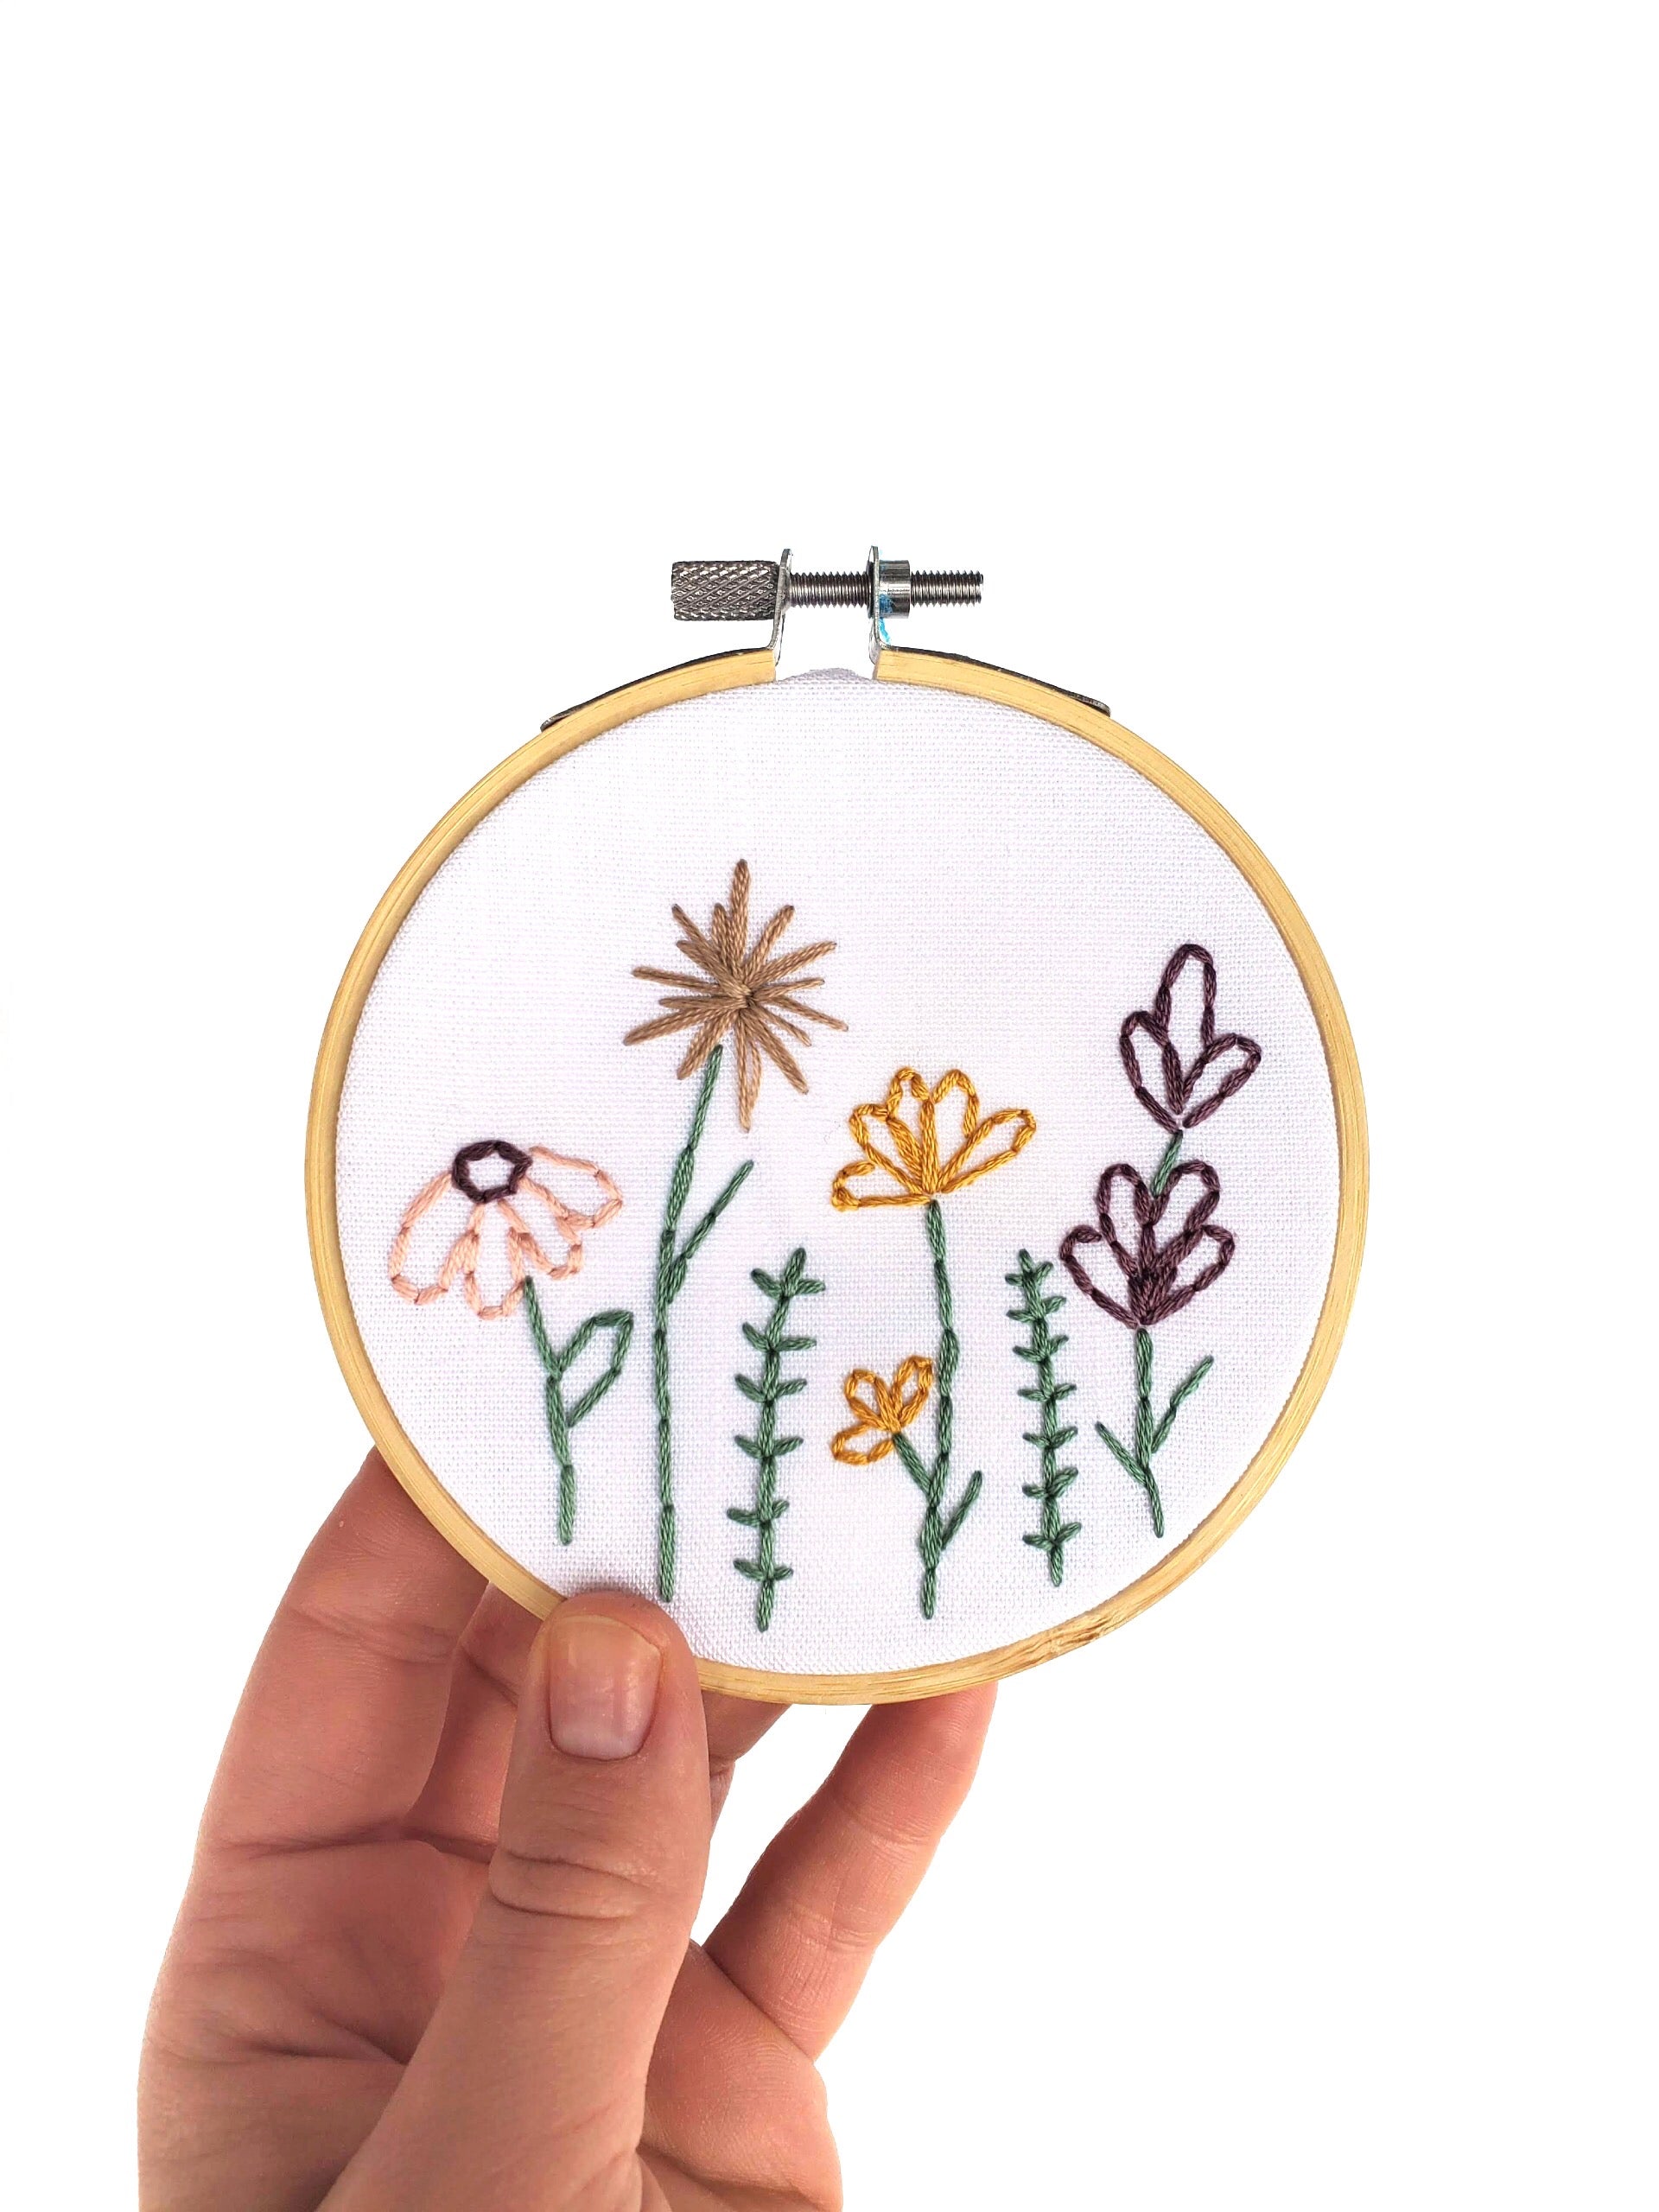 6 Garden Fresh Embroidery Kit by Loops & Threads® 